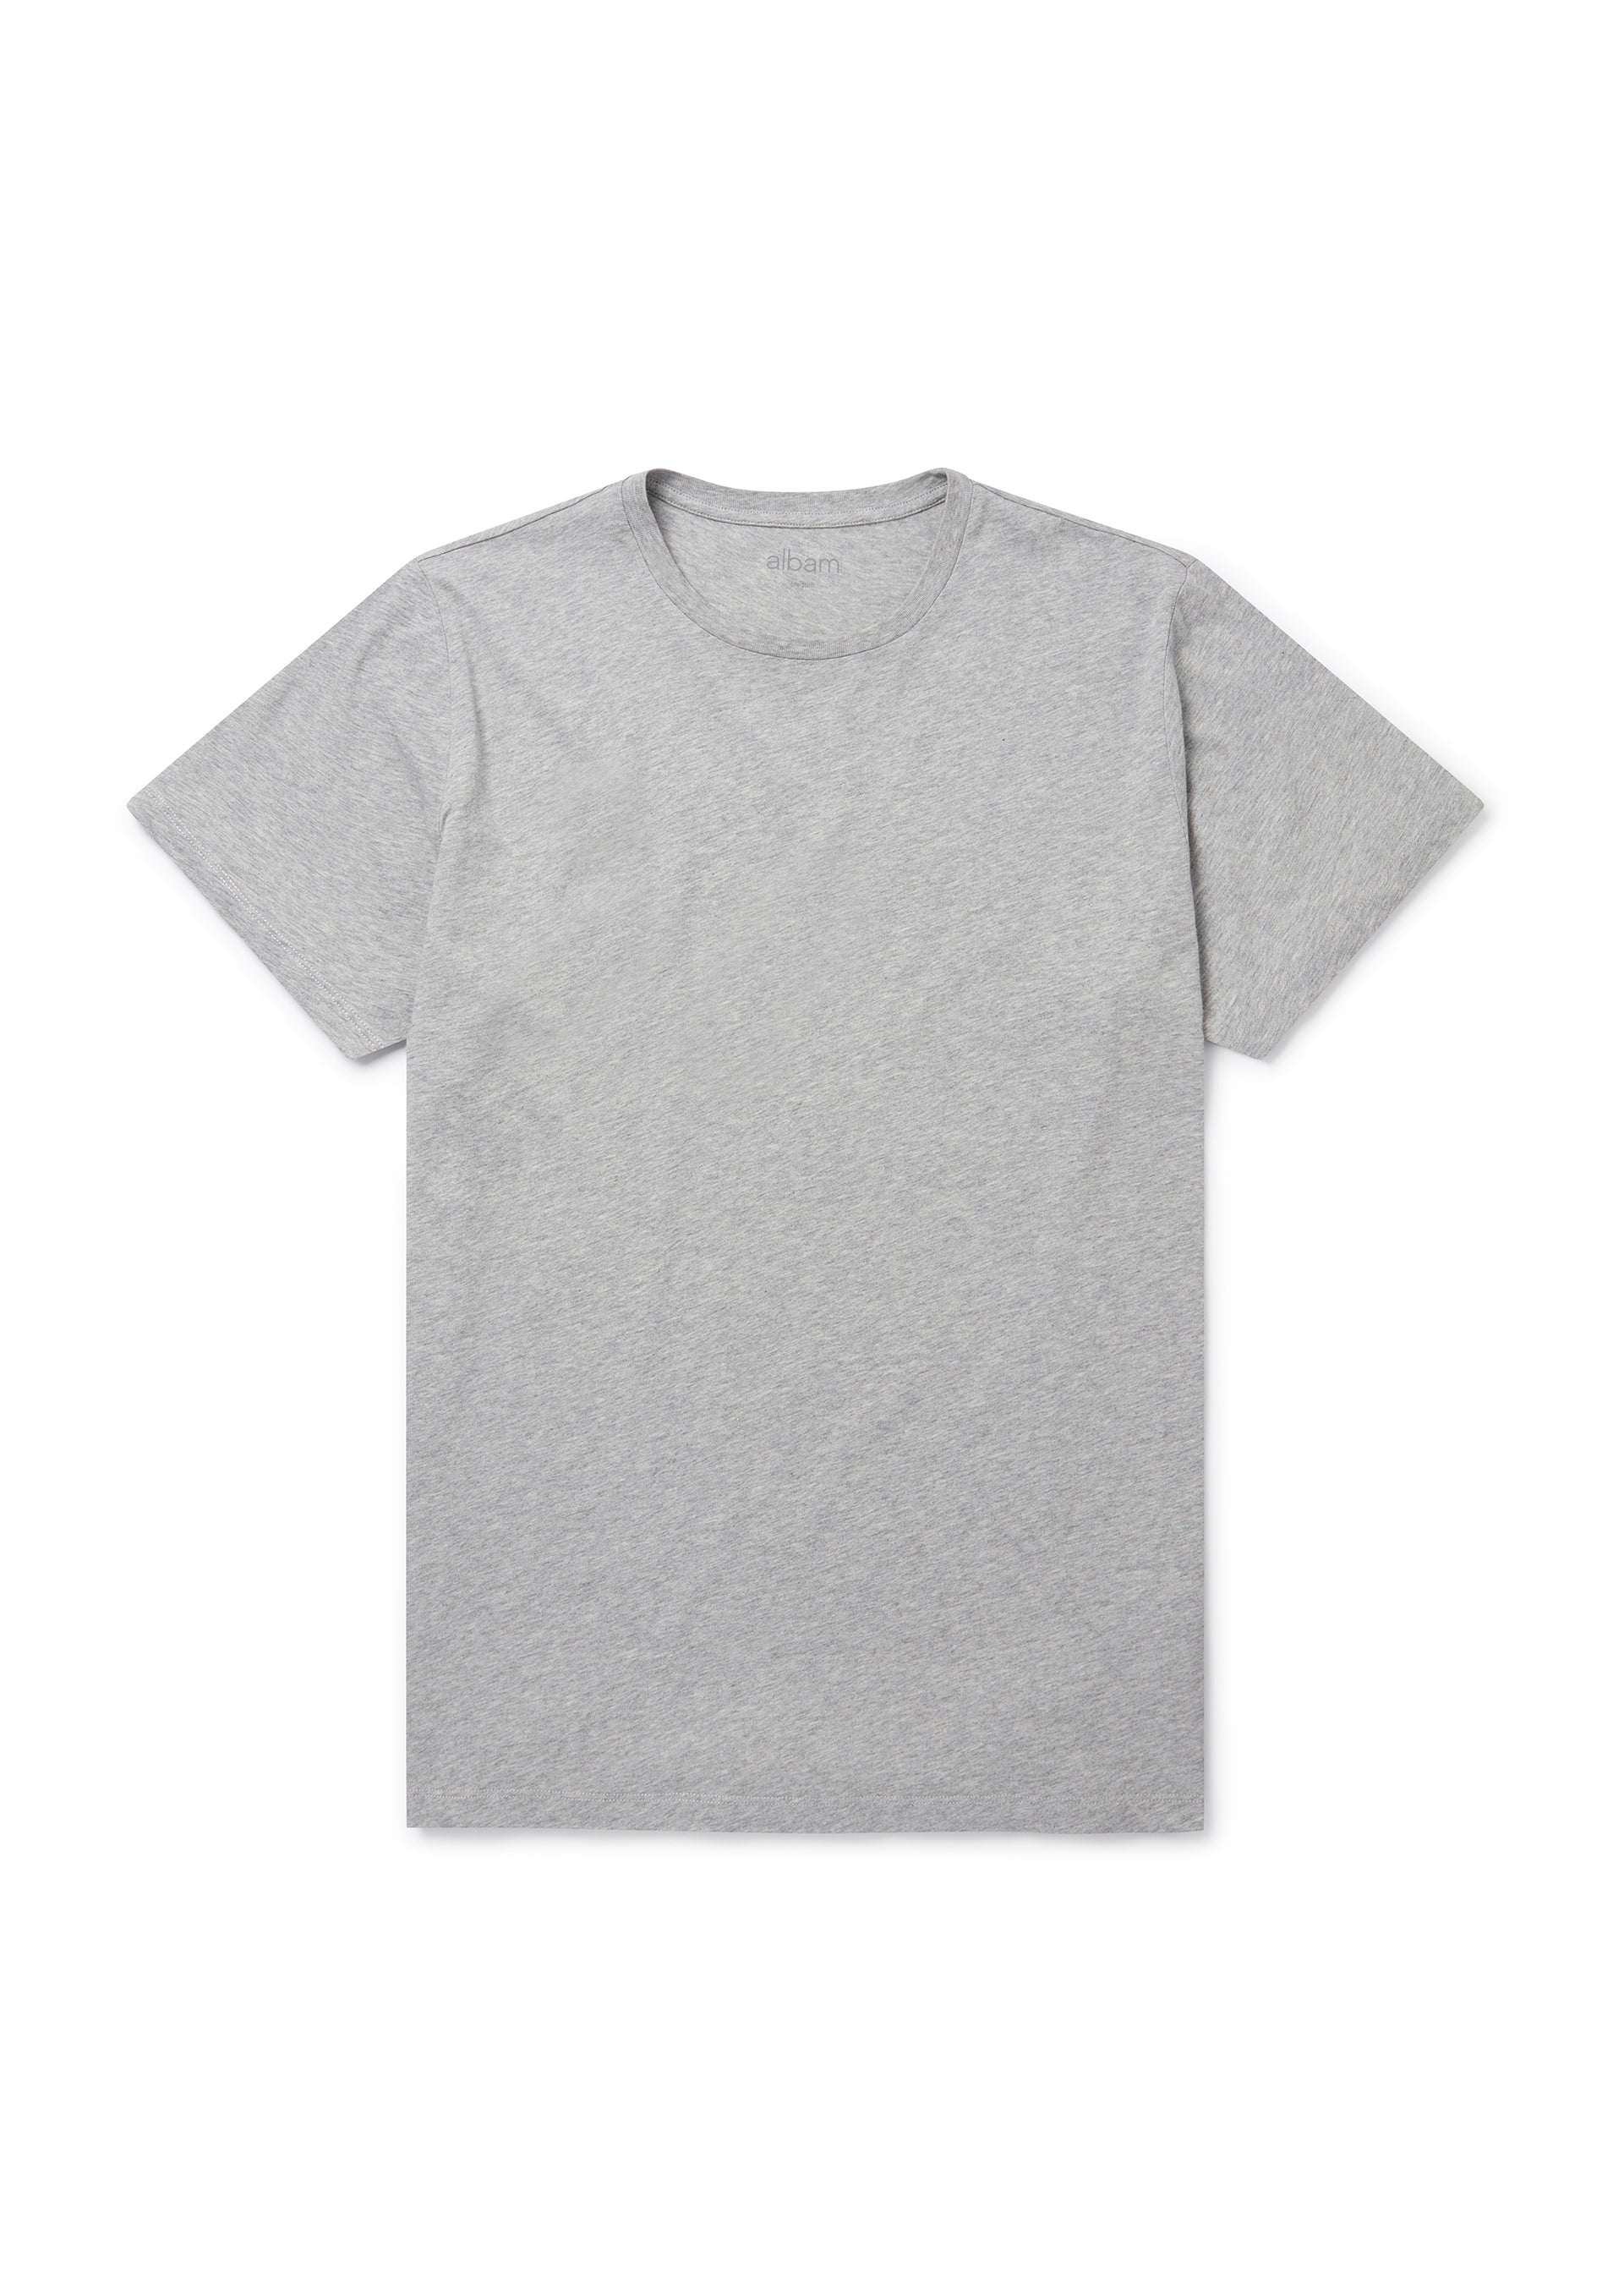 Classic T-Shirt in Grey Marl | albam Clothing